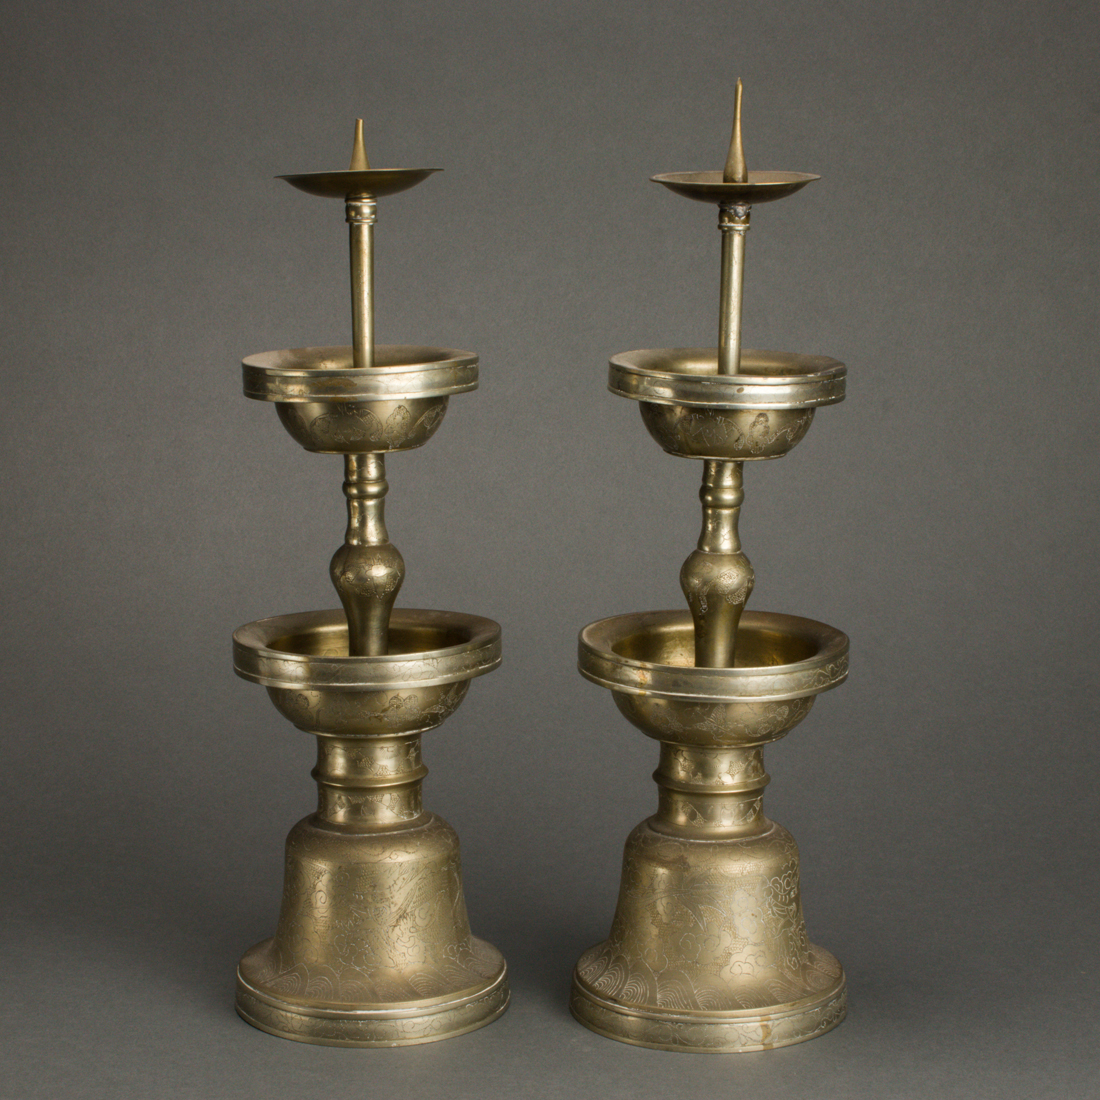 PAIR OF BRONZE CANDLESTICK HOLDERS